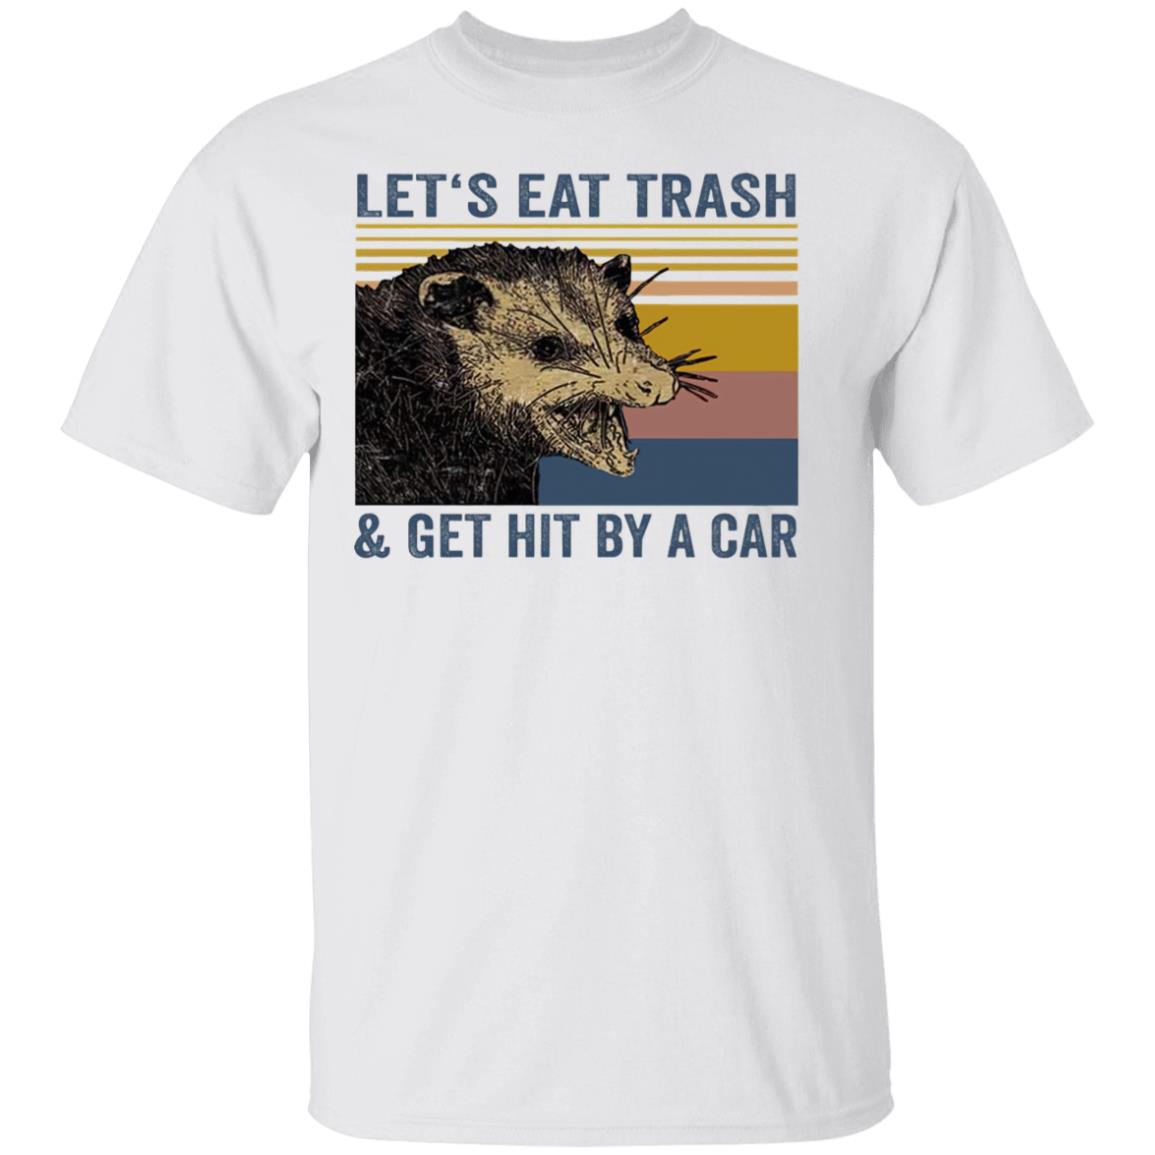 Let’s eat trash and get hit by a car Raccoon shirt